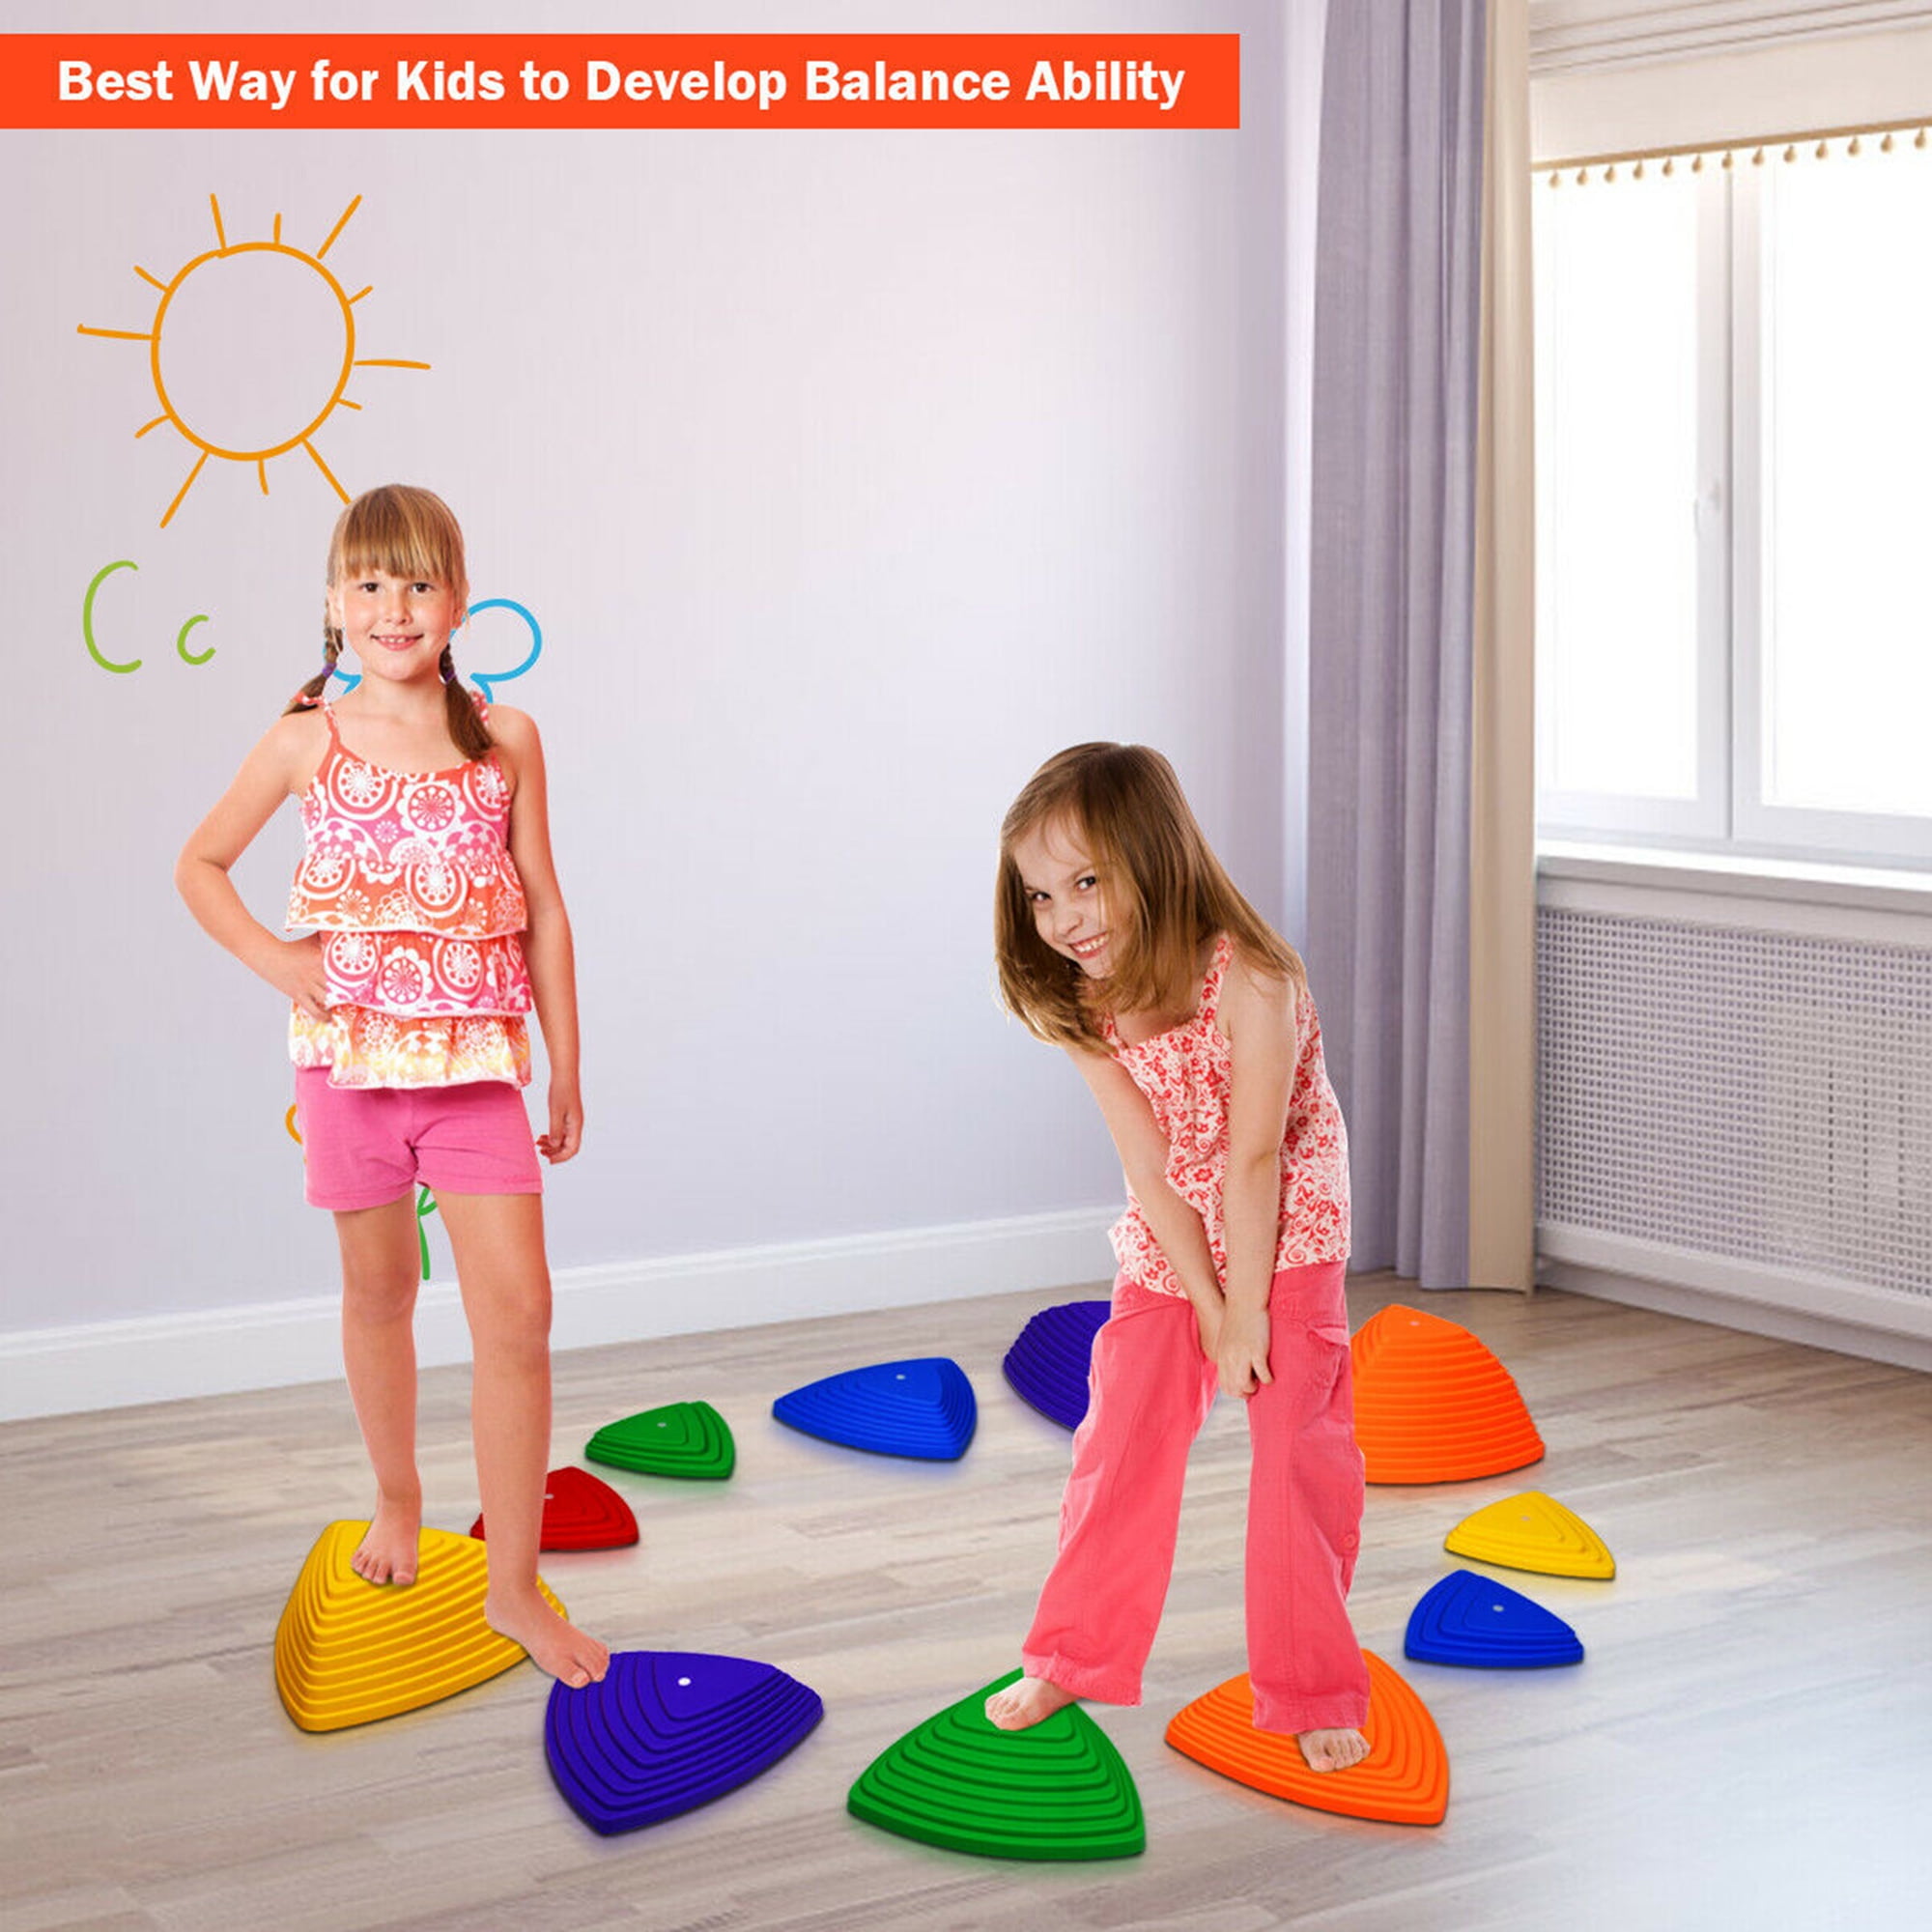 Details about   Stepping Stones for Kids Ex... Set of 11 pcs for Balance with Non-Slip Bottom 